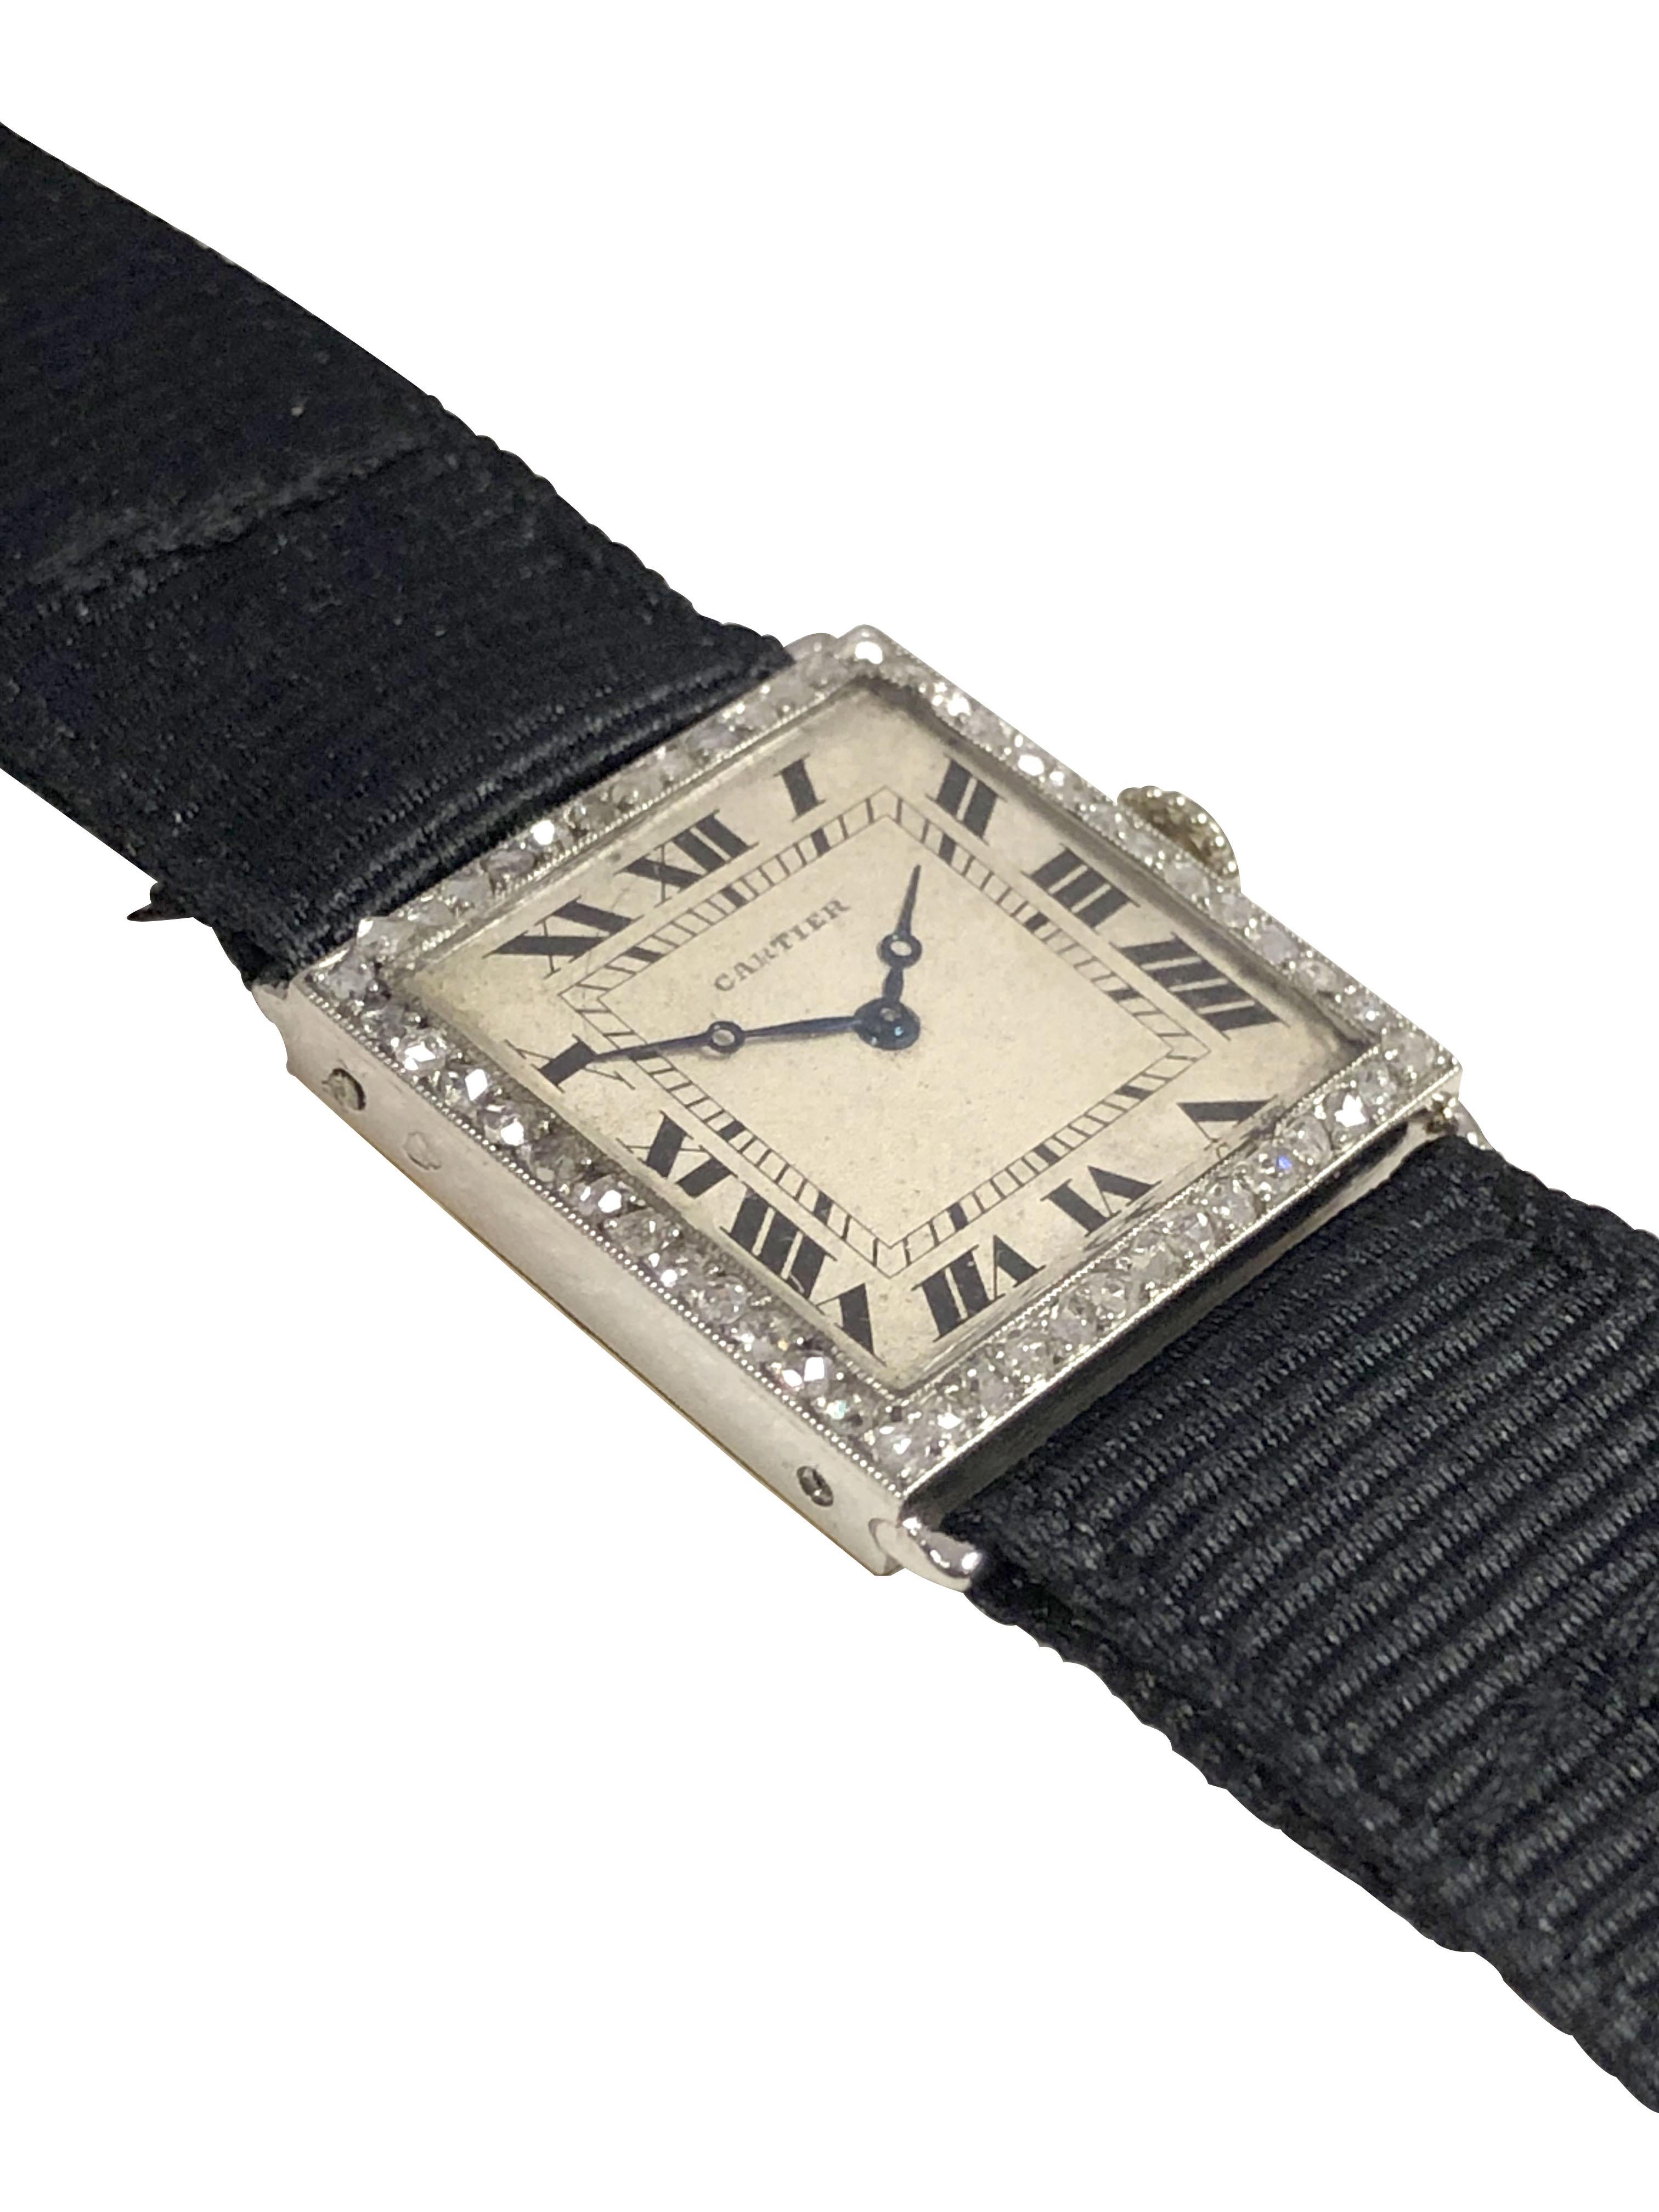 Circa 1920s Cartier Ladies Wrist Watch, 20 X 20 MM French Stamped and numbered Platinum Case with 18K Yellow Gold back, Rose cut Diamonds set Bezel. 18 Jewel Mechanical, Manual Wind ( EWC ) European Watch and Clock Company Movement. Original